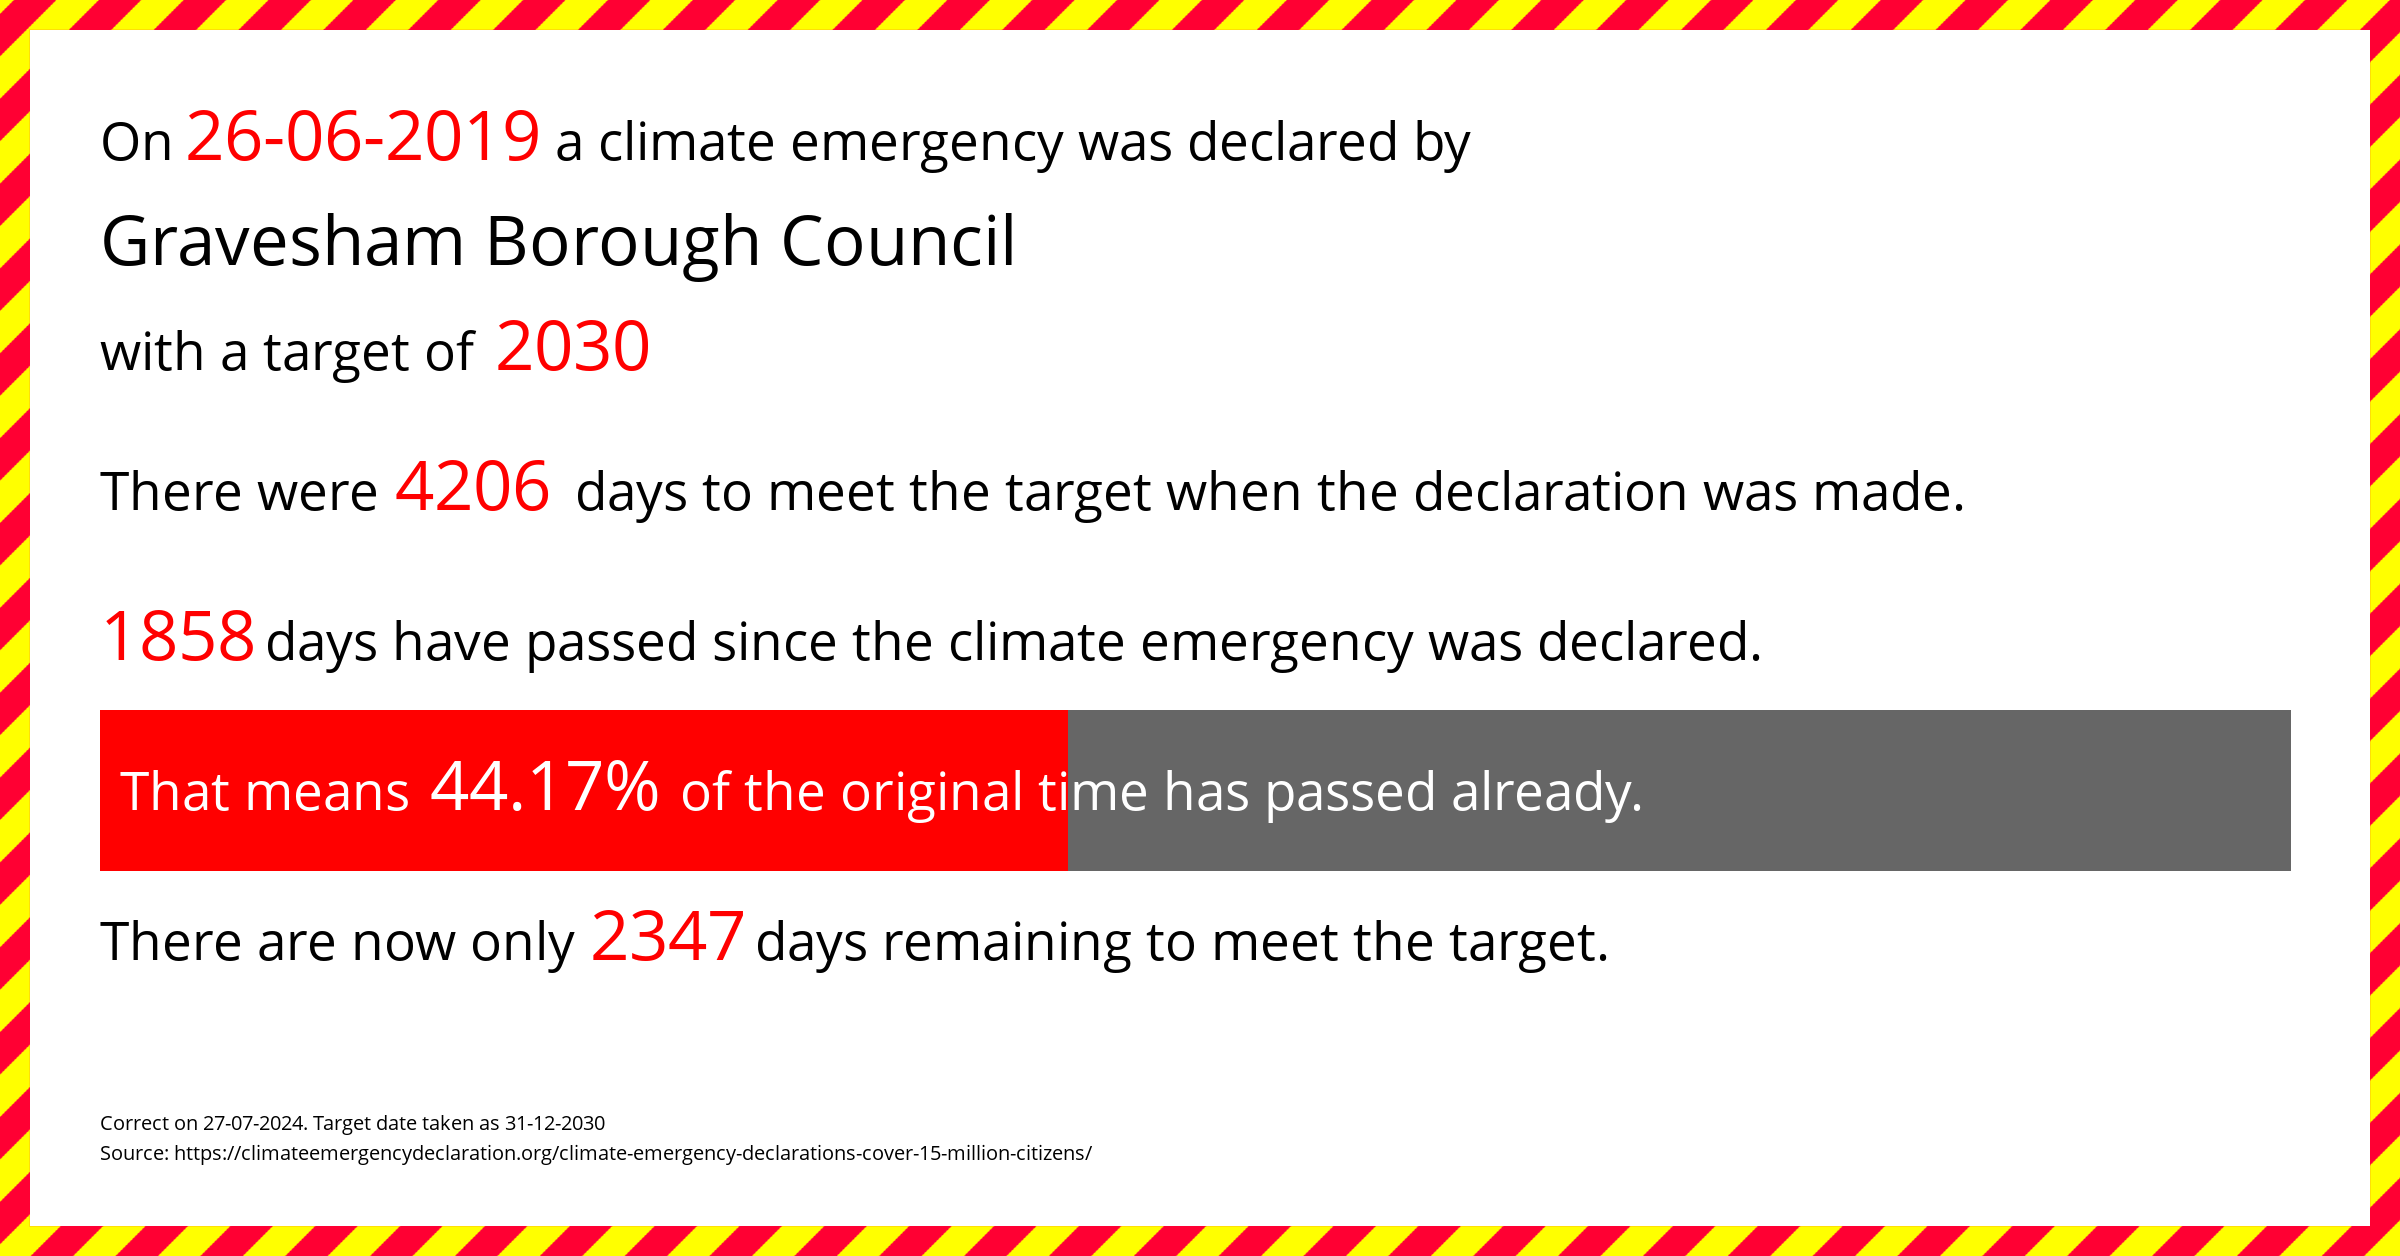 Gravesham Borough Council declared a Climate emergency on Wednesday 26th June 2019, with a target of 2030.